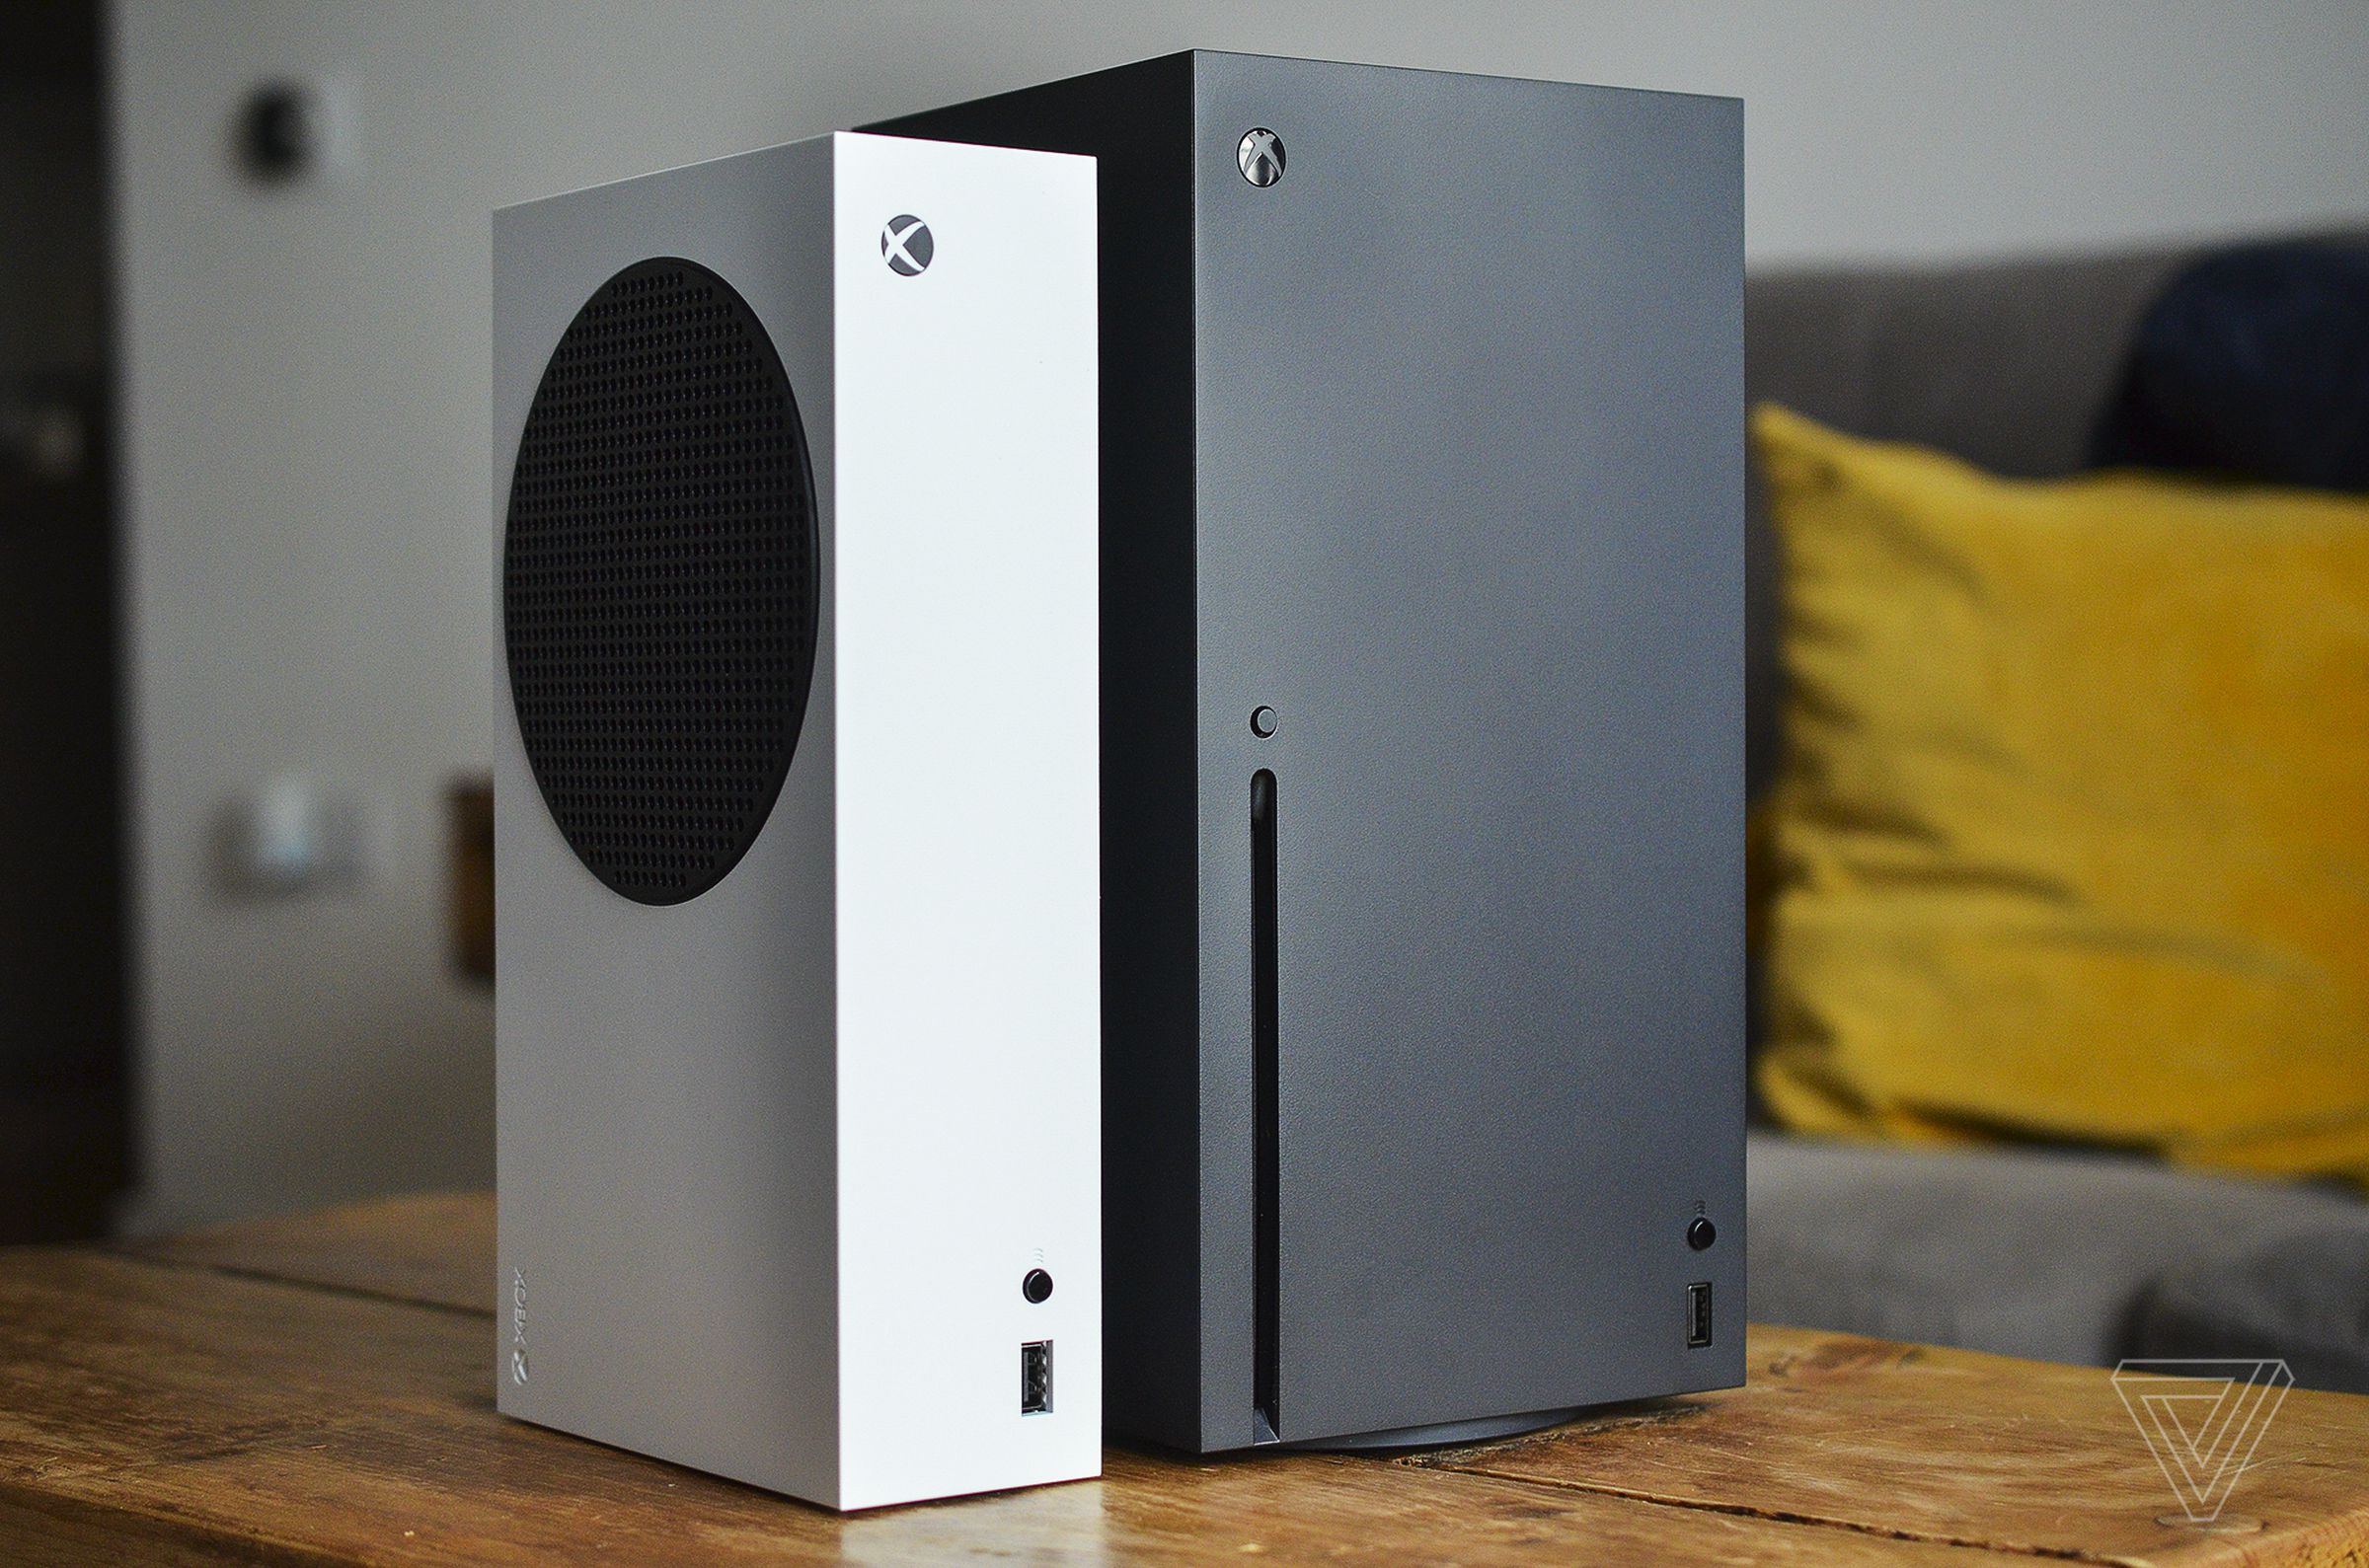 Microsoft's white Xbox Series S sits next to a larger black Xbox Series X on a wooden coffee table in the living room